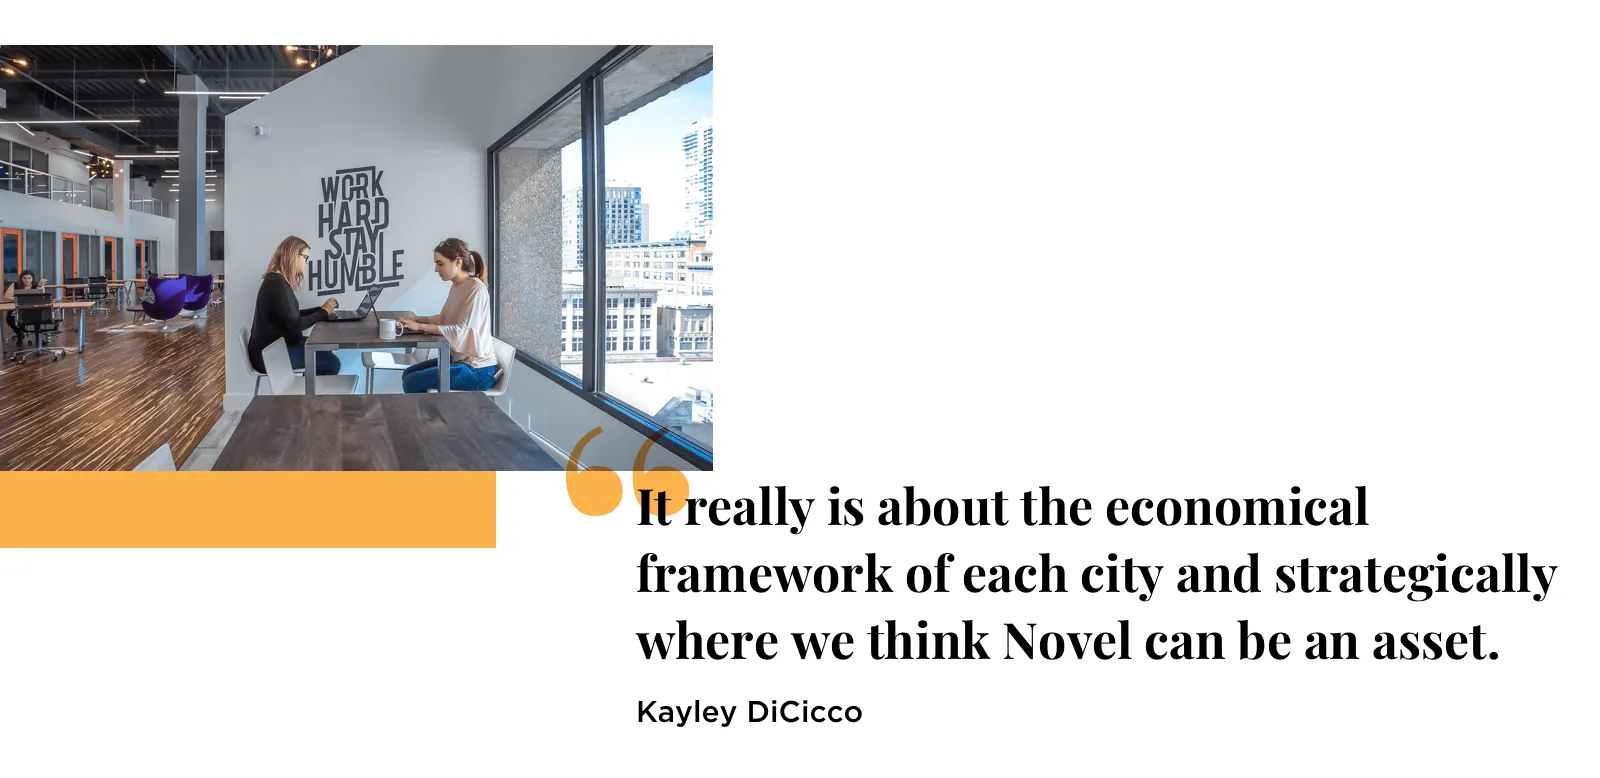 Future of Work with Kayley DiCicco